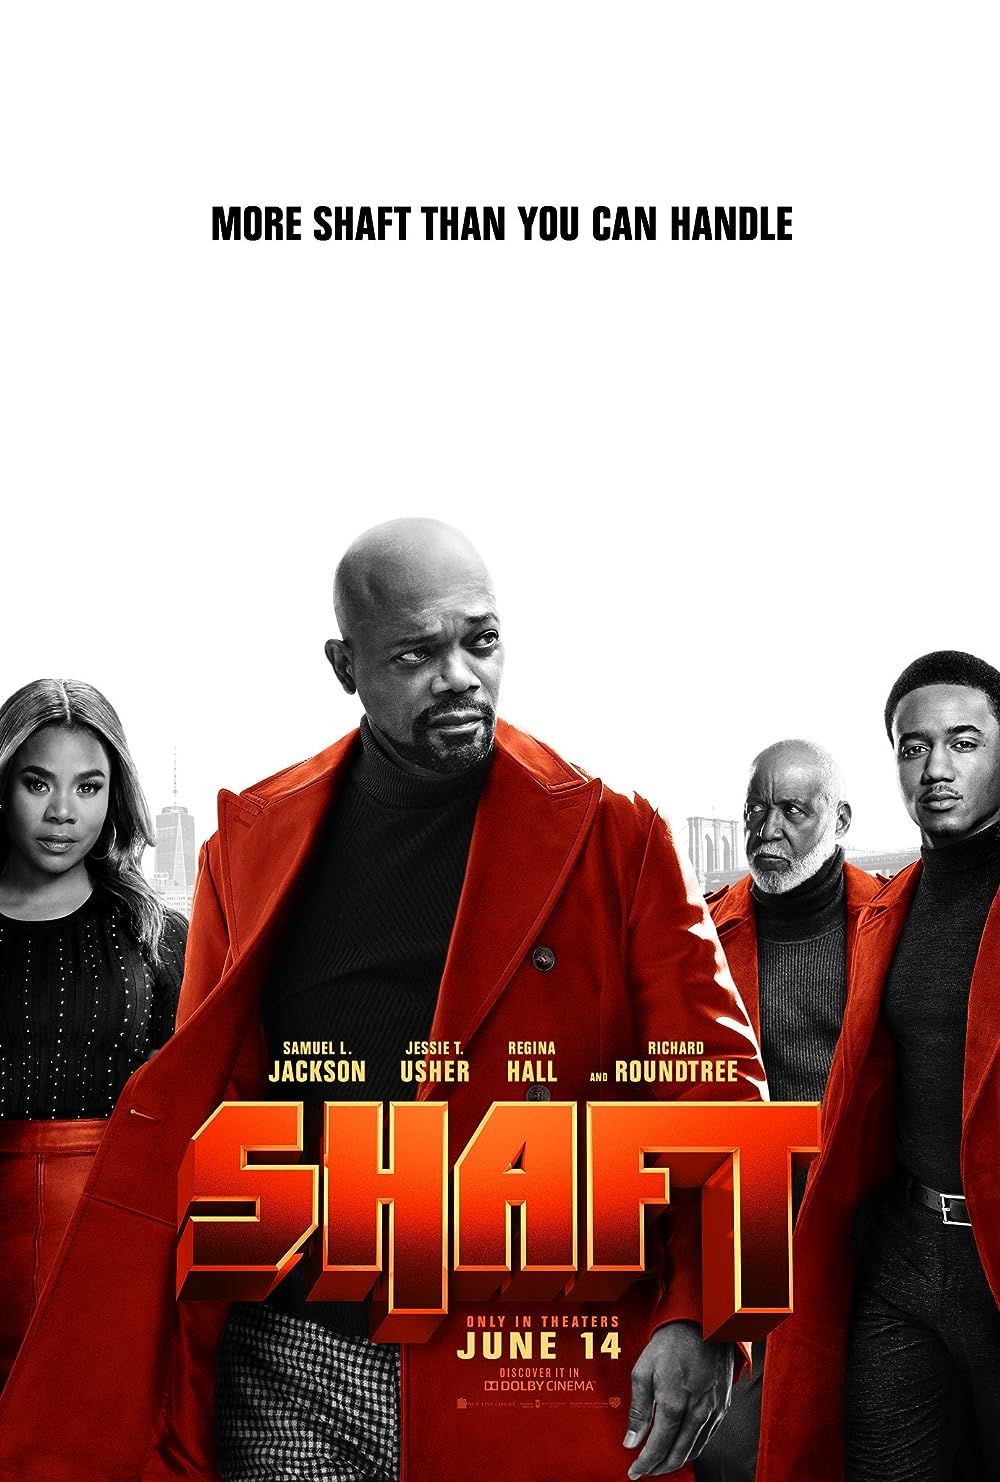 The Shaft Family on the Shaft 2019 Poster